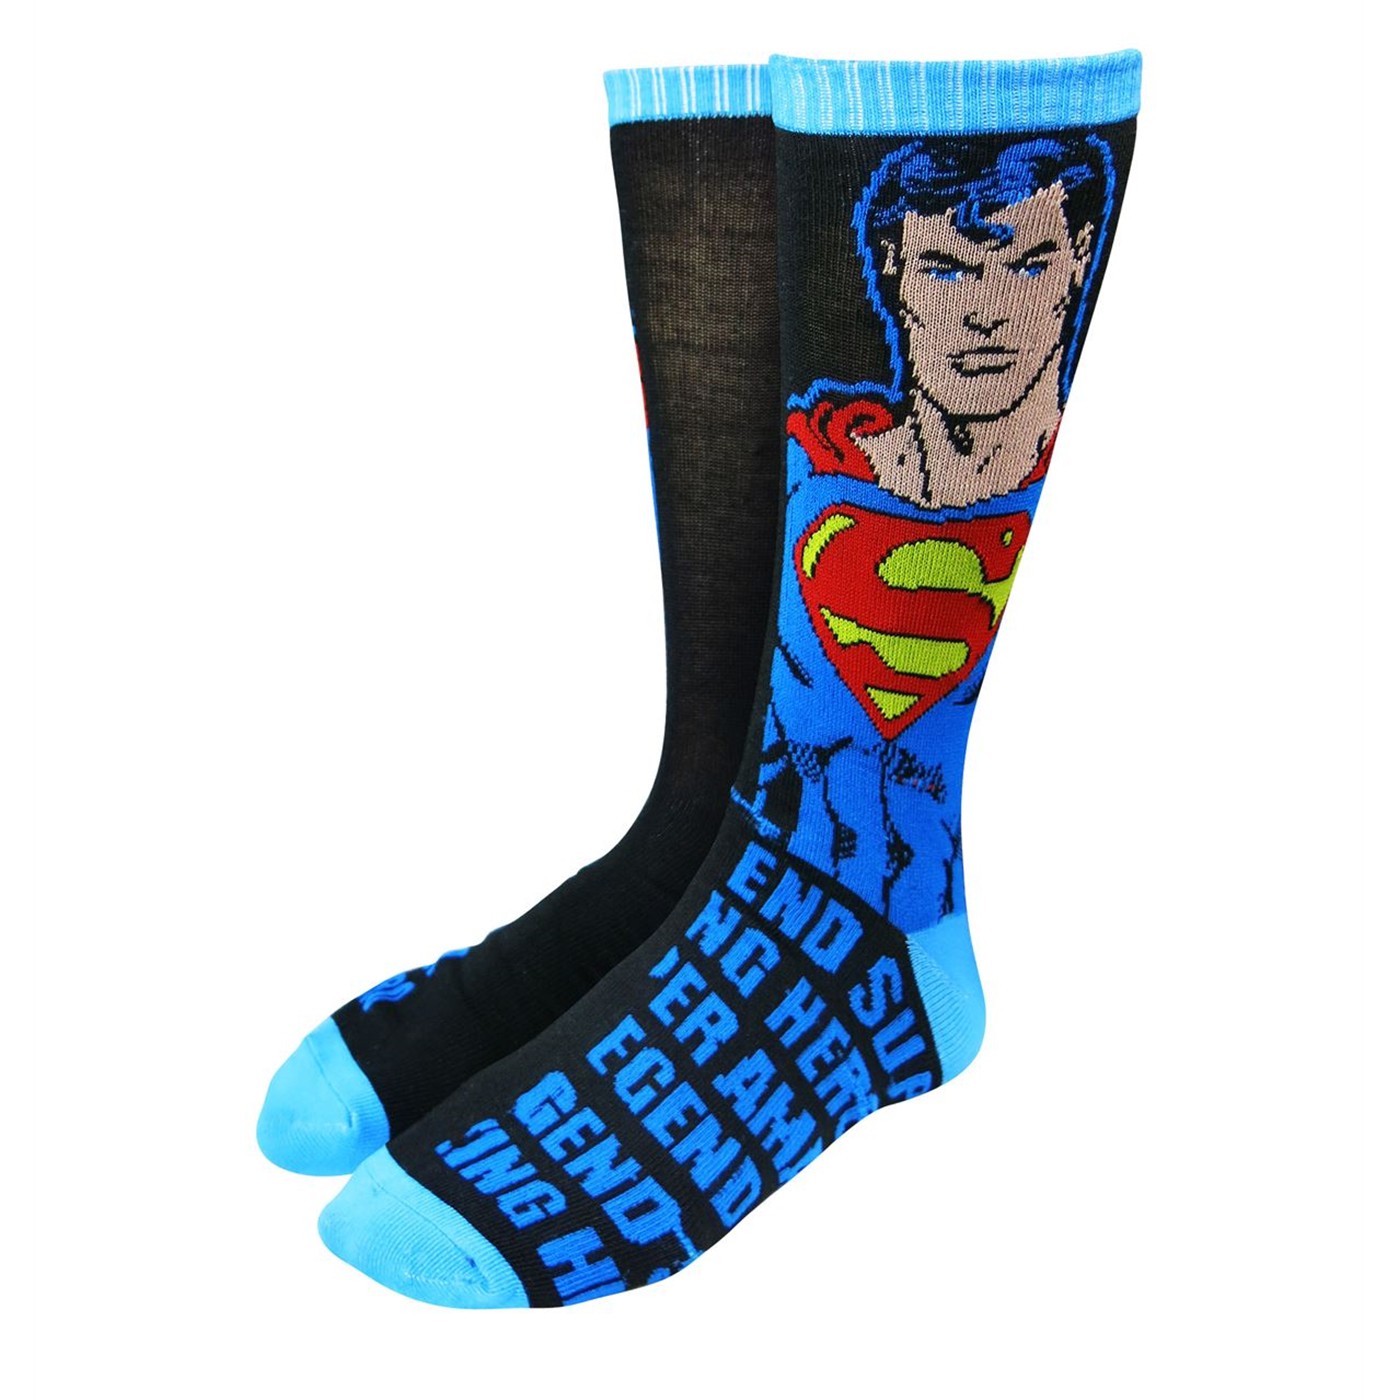 Superman Image and Stripes Sock 2 Pack